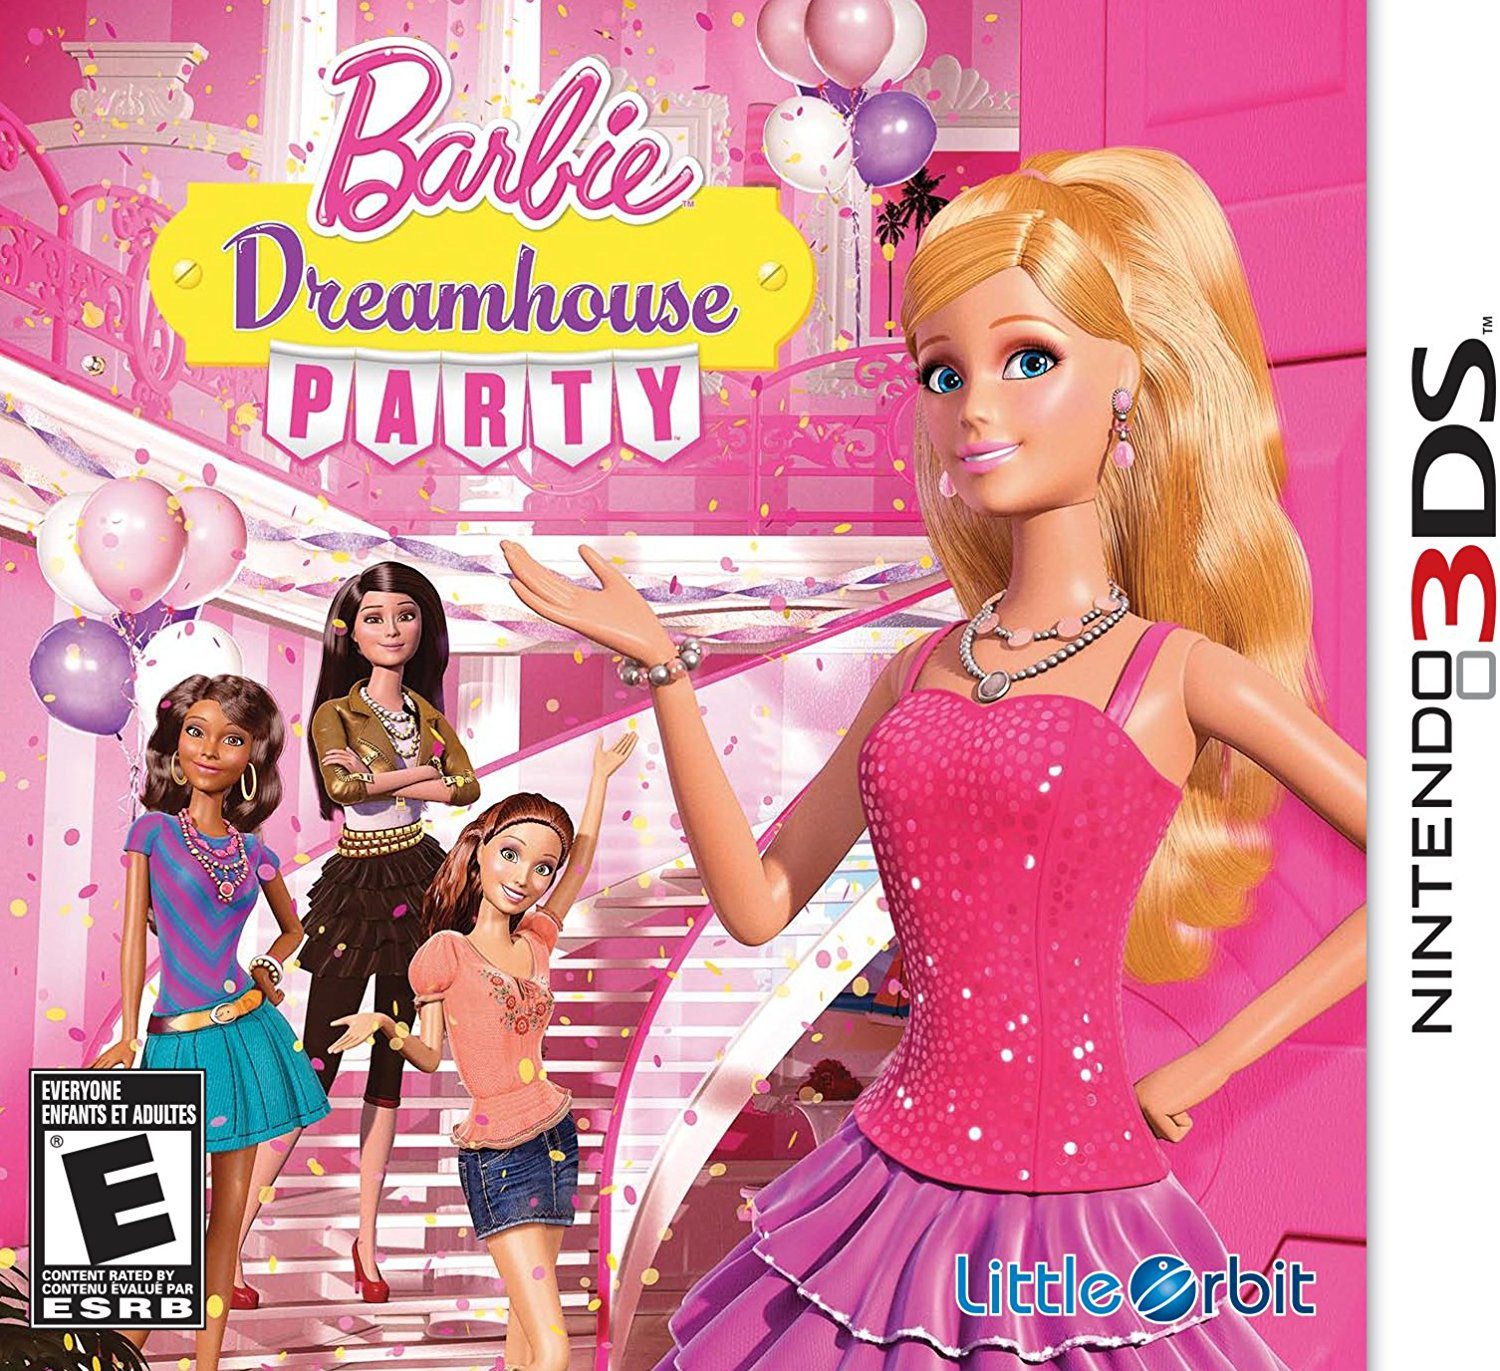 Play Barbie Dreamhouse Adventures Free on PC